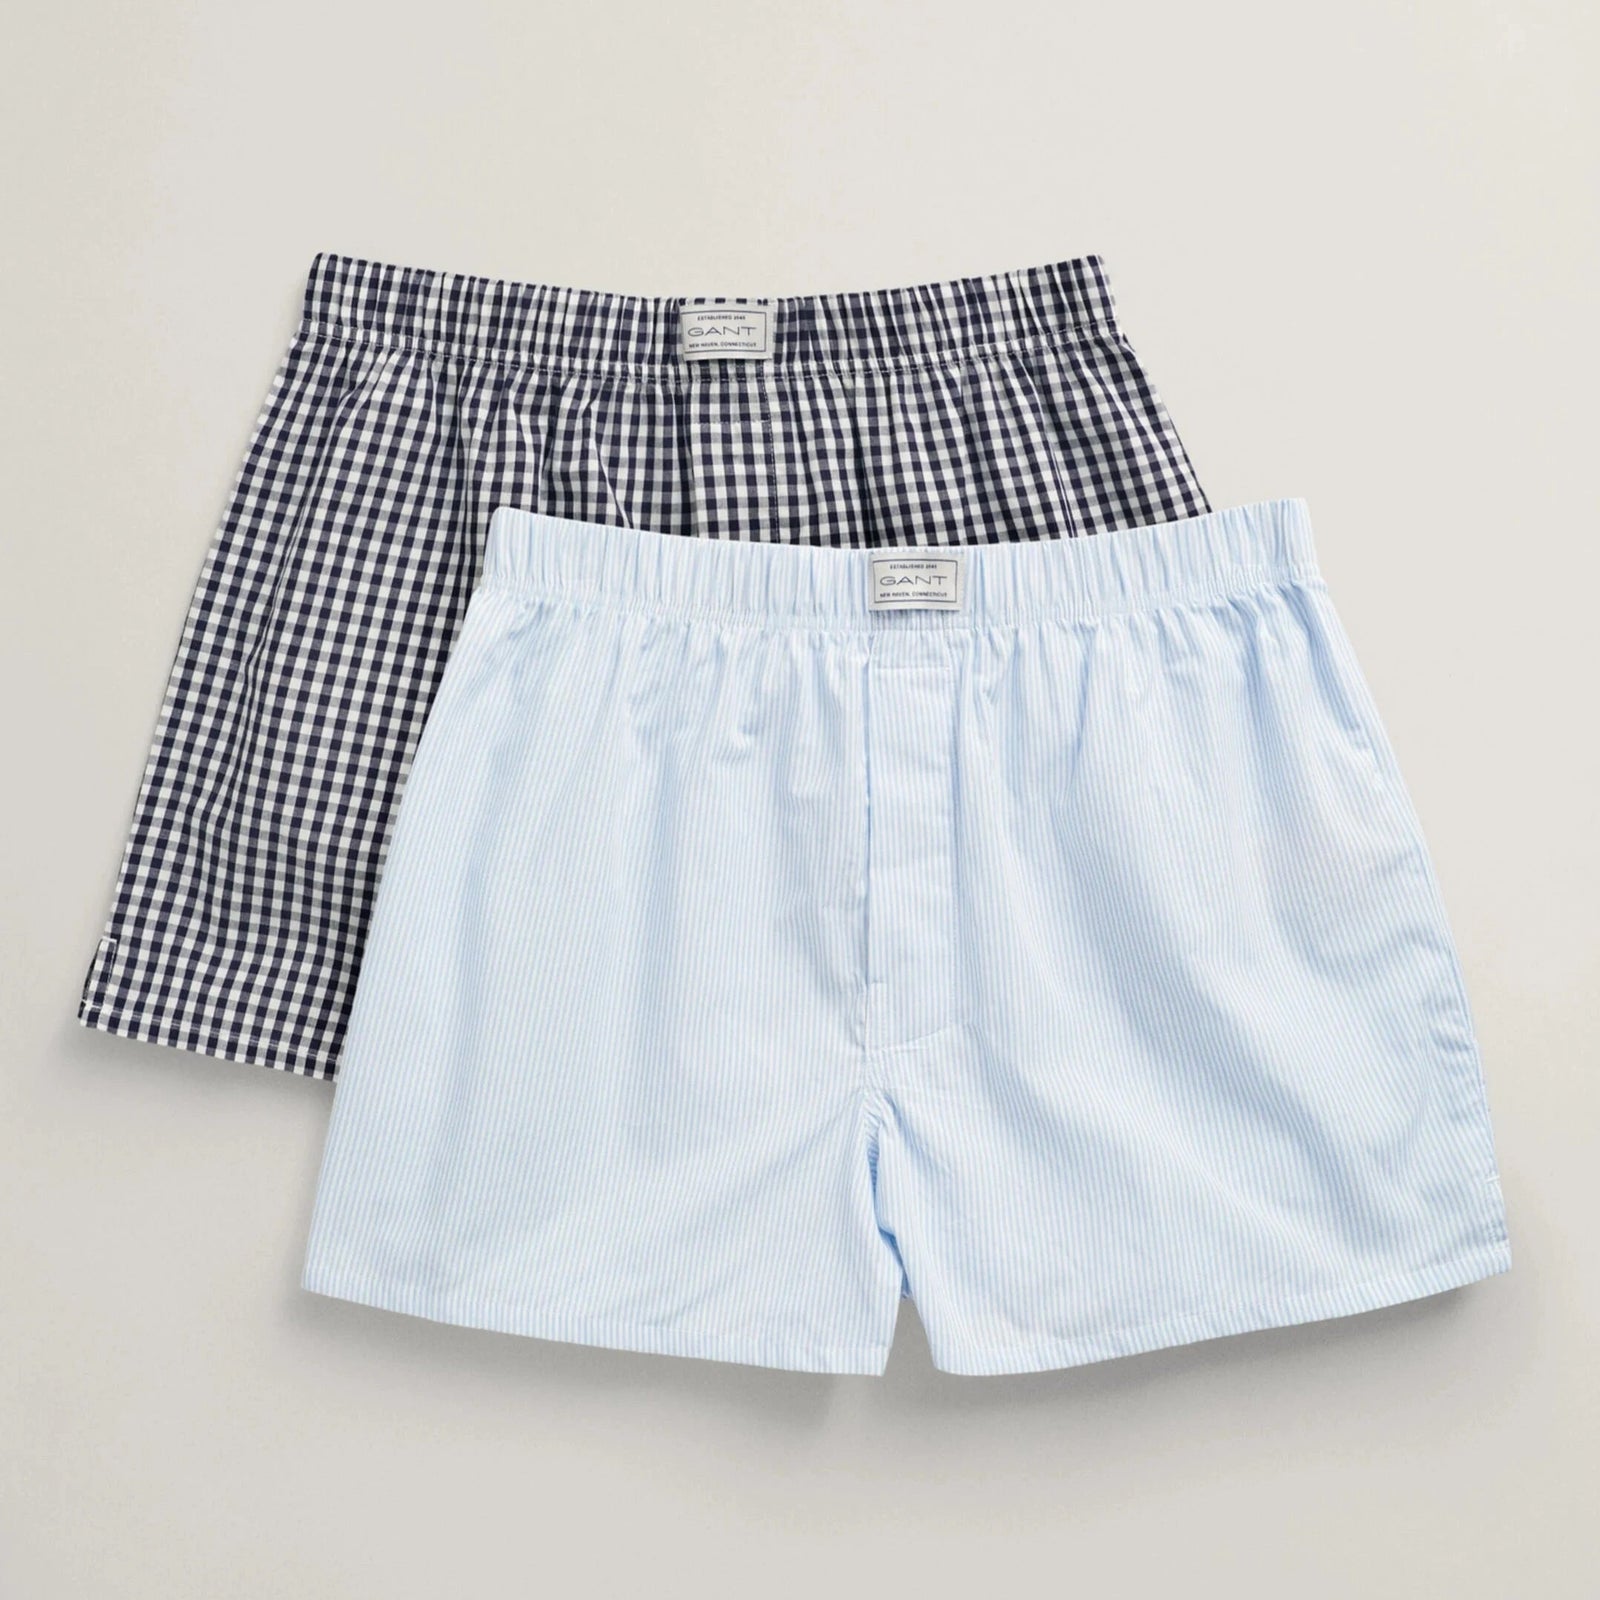 GANT 2-Pack Striped and Gingham Boxers